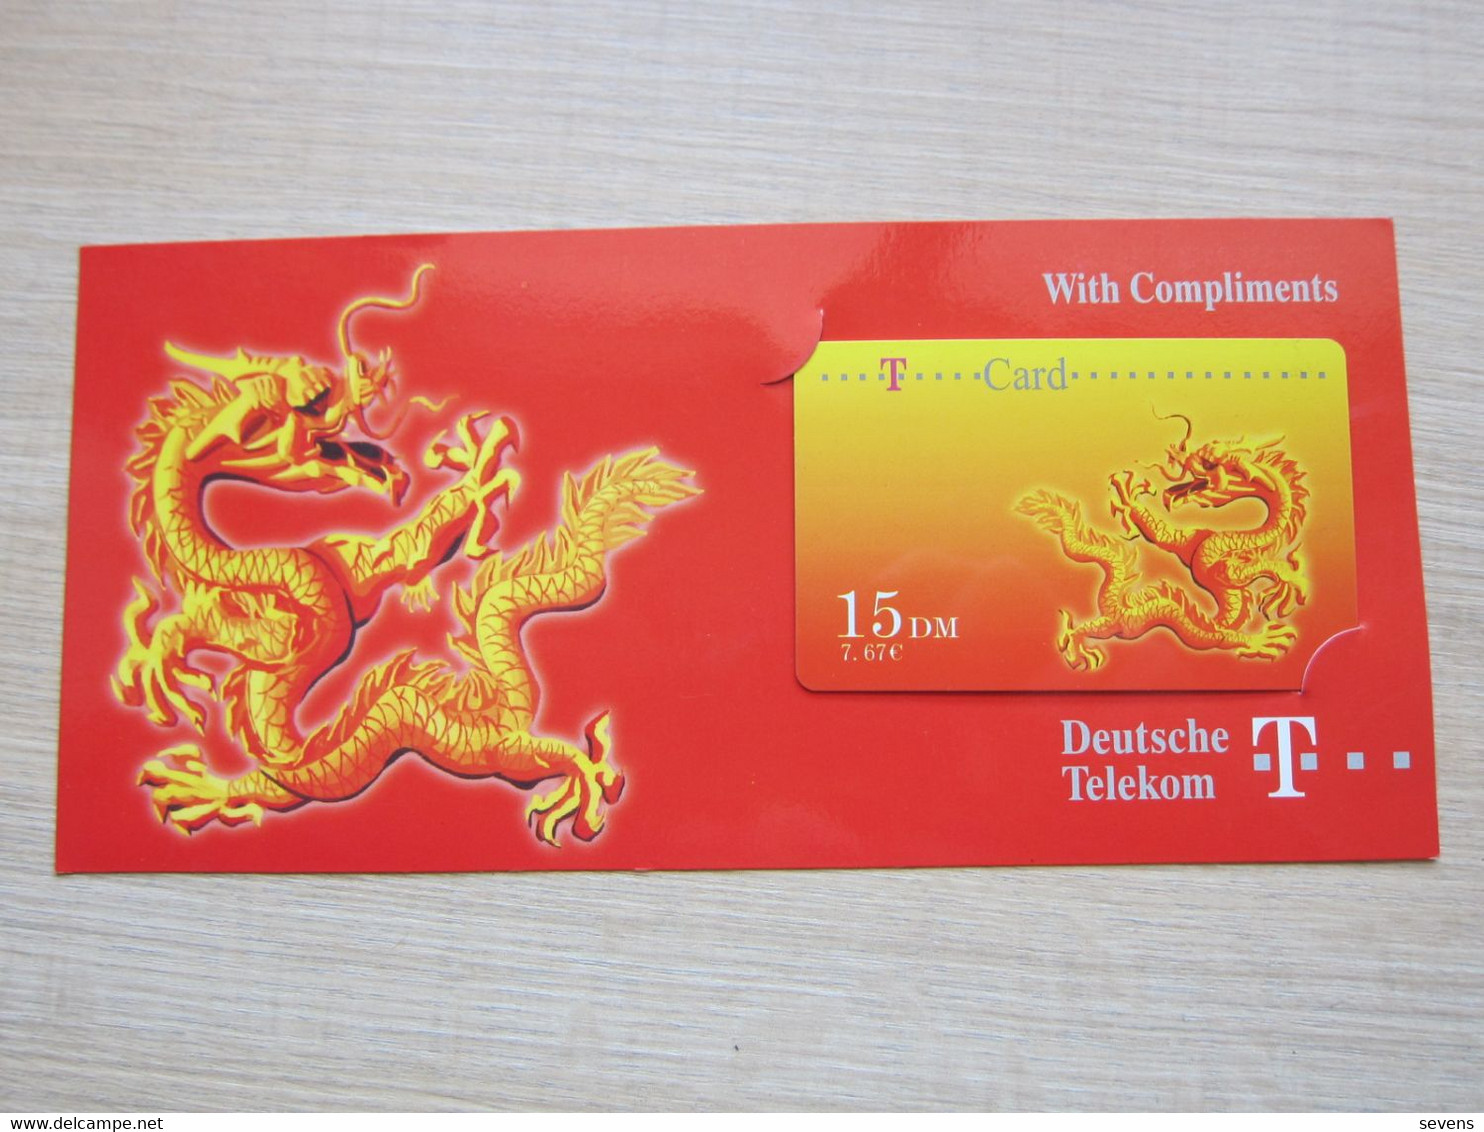 Compliments By Deutsche Telekom Representation Beijing, Year Of Dragon, Mint Expired,1500 Pcs Issued - T-Pay Micro-Money